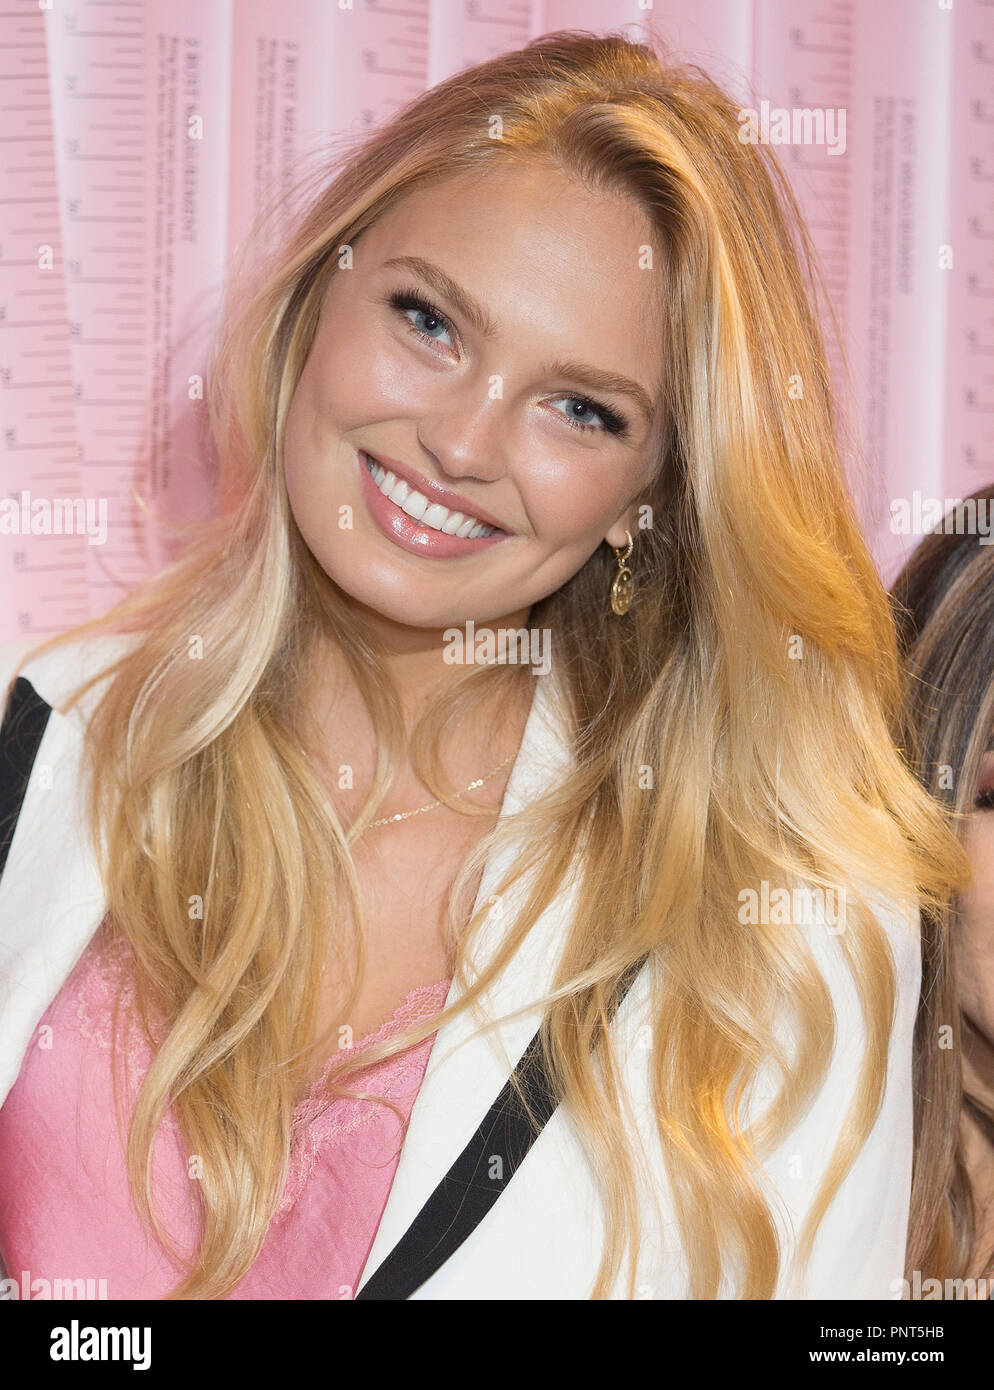 Victoria's Secret Angel Romee Strijd promotes the bra fitting service  available at the Victoria's Secret store on New Bond Street, London Stock  Photo - Alamy